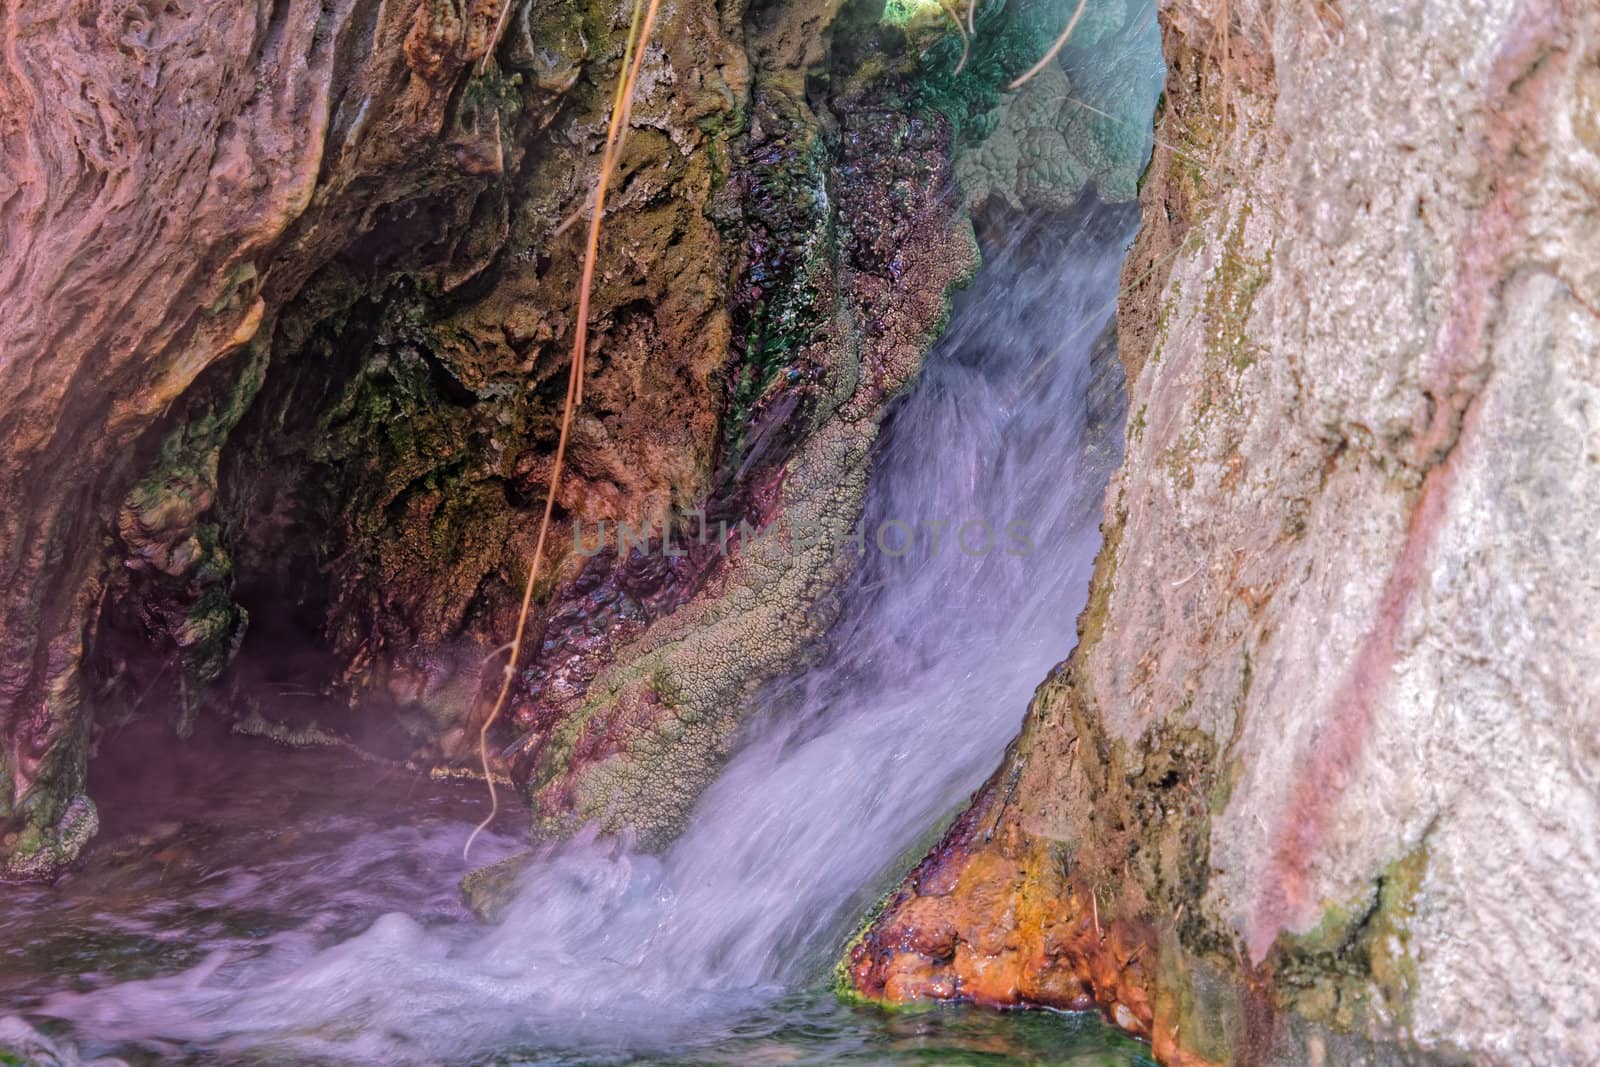 Small waterfall near a hot spring in Main, with colored precipitates of iron, copper, manganese and sulfur compounds by geogif